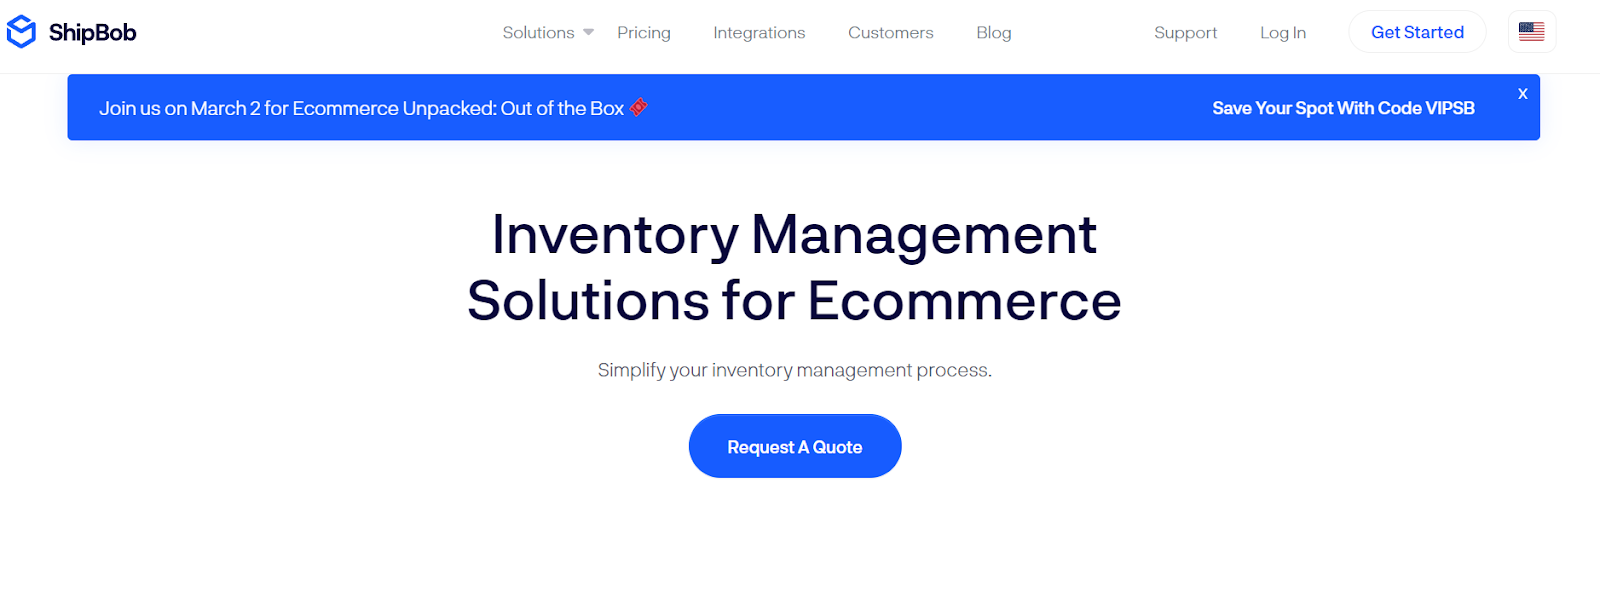 shipbob inventory management software